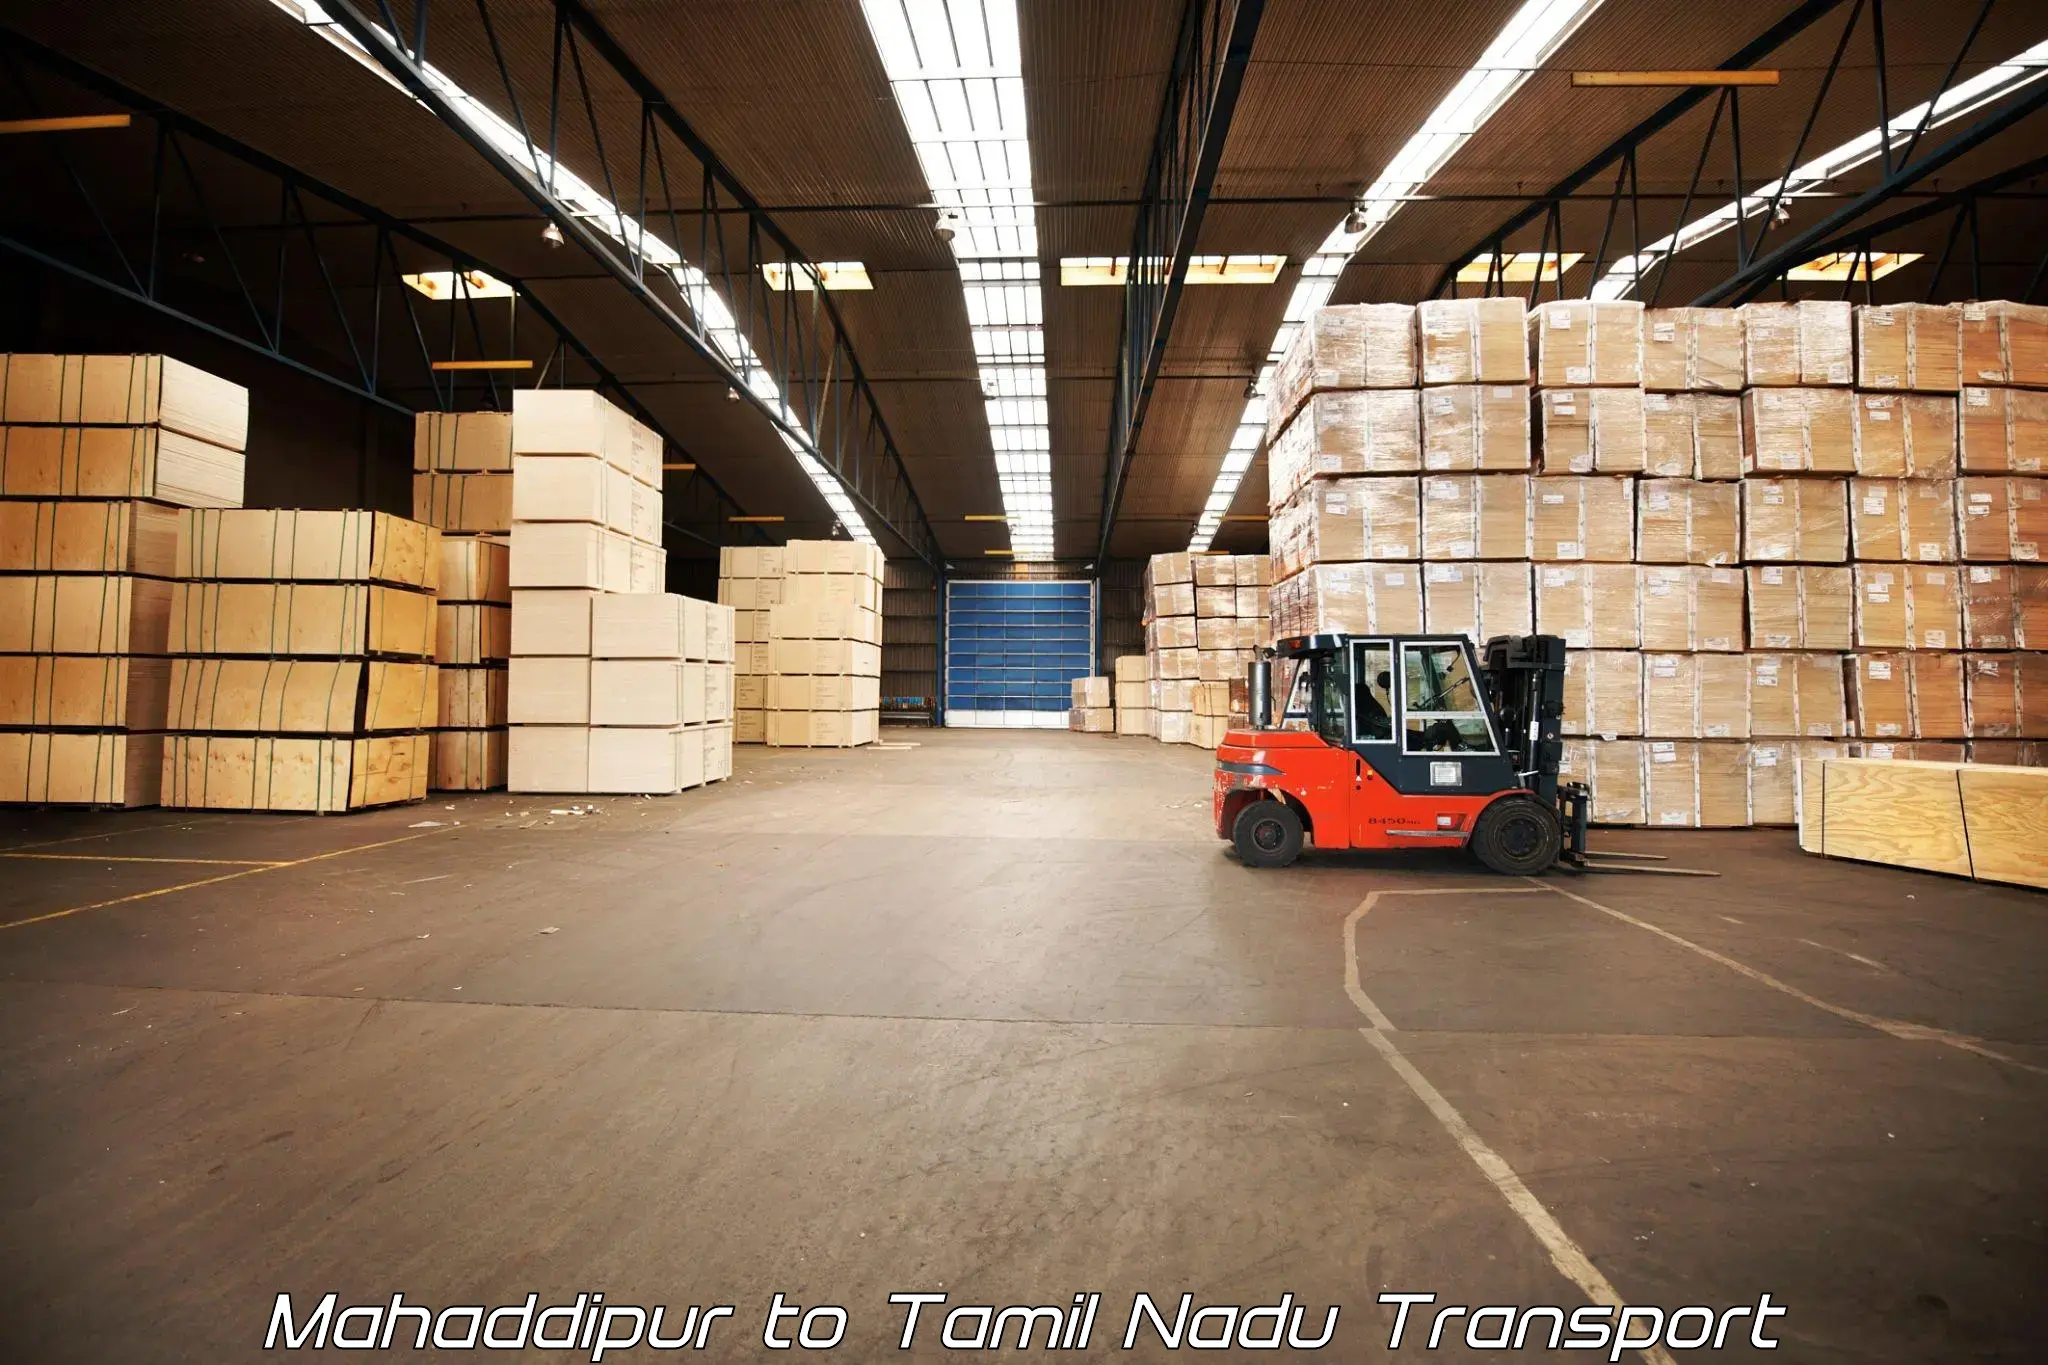 Cargo transportation services Mahaddipur to Nagercoil